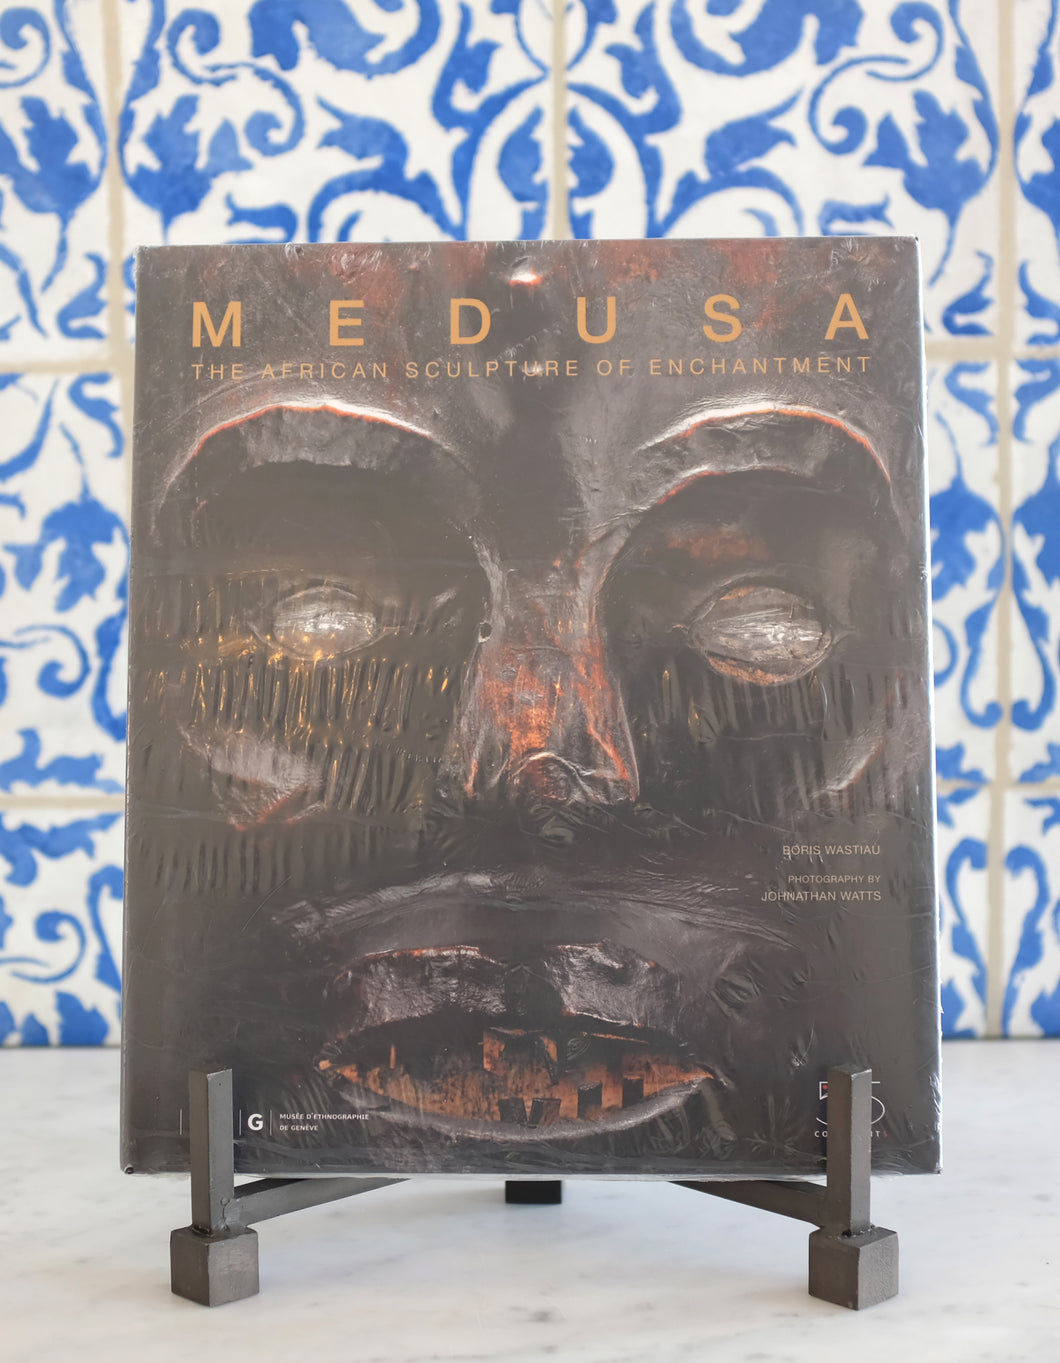 Medusa: The African Sculpture of Enchantment